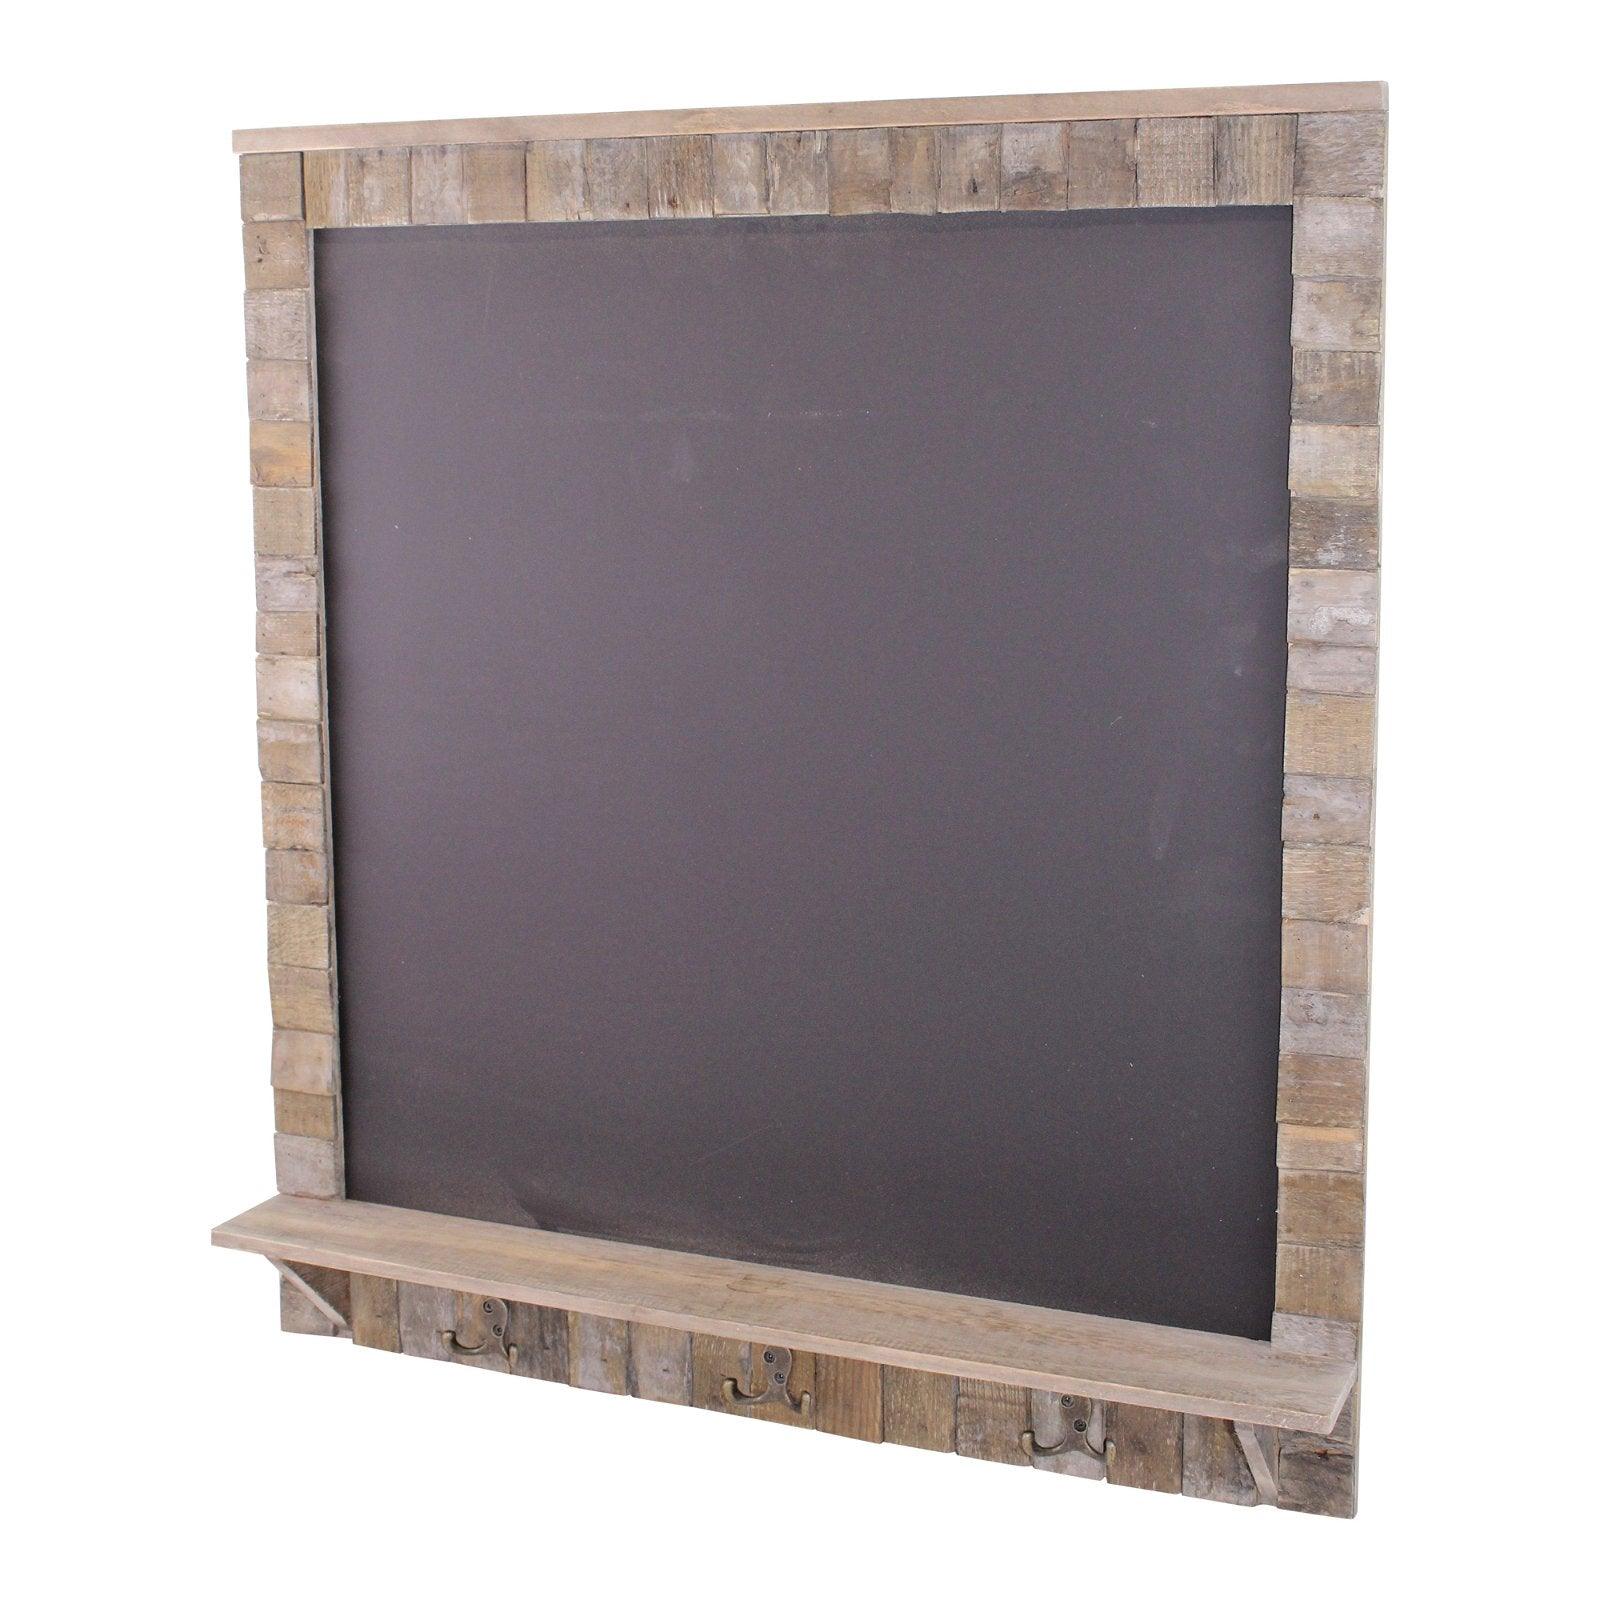 View Large Blackboard with Driftwod Effect Surround Shelf and 3 Double Hooks information